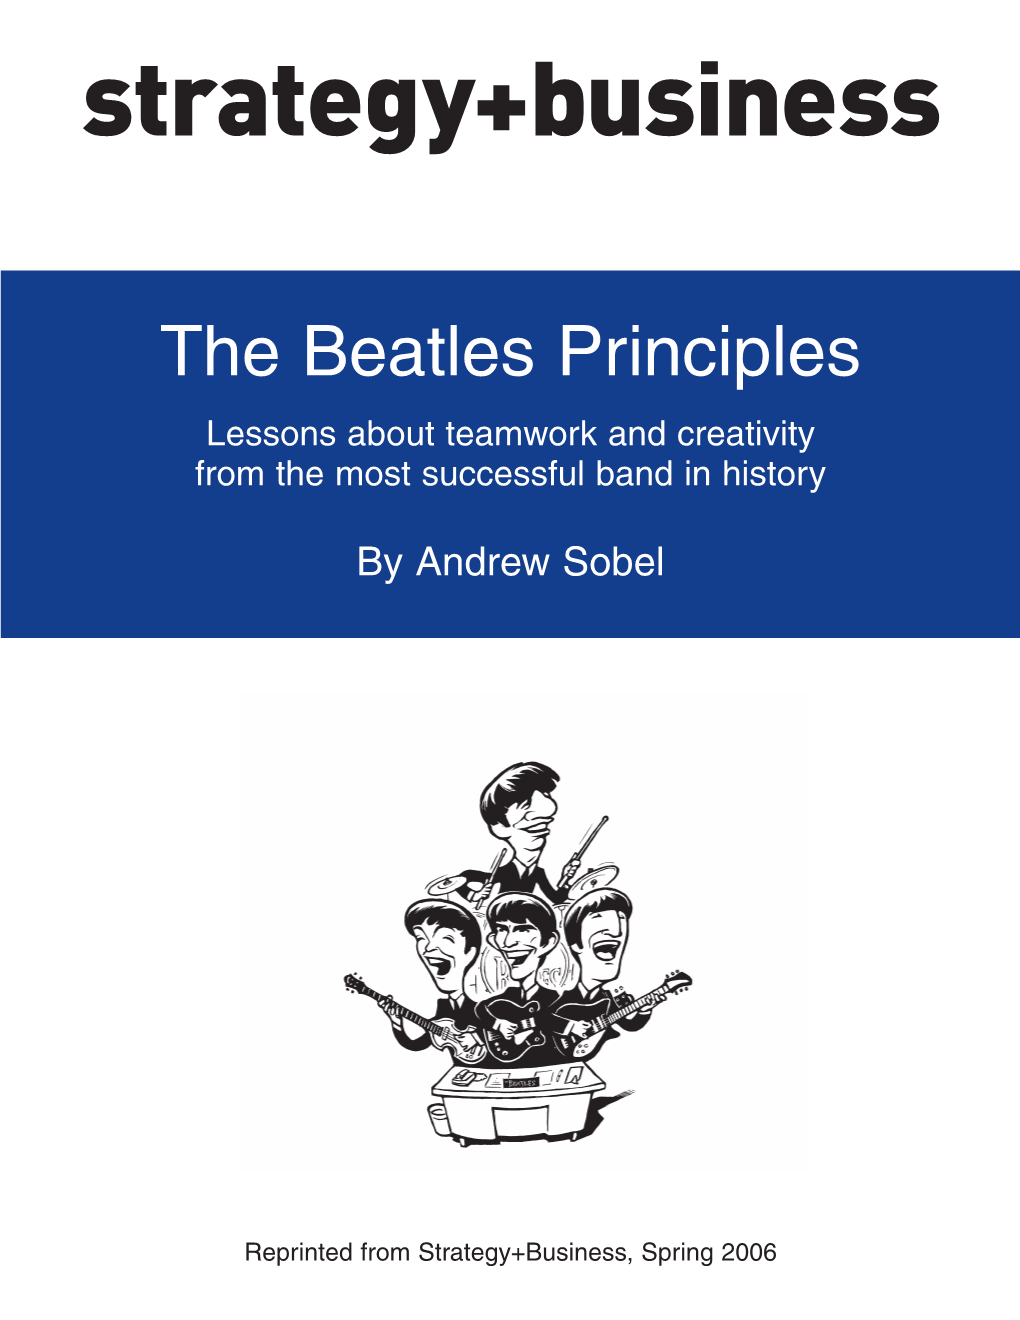 Beatles Principles Lessons About Teamwork and Creativity from the Most Successful Band in History